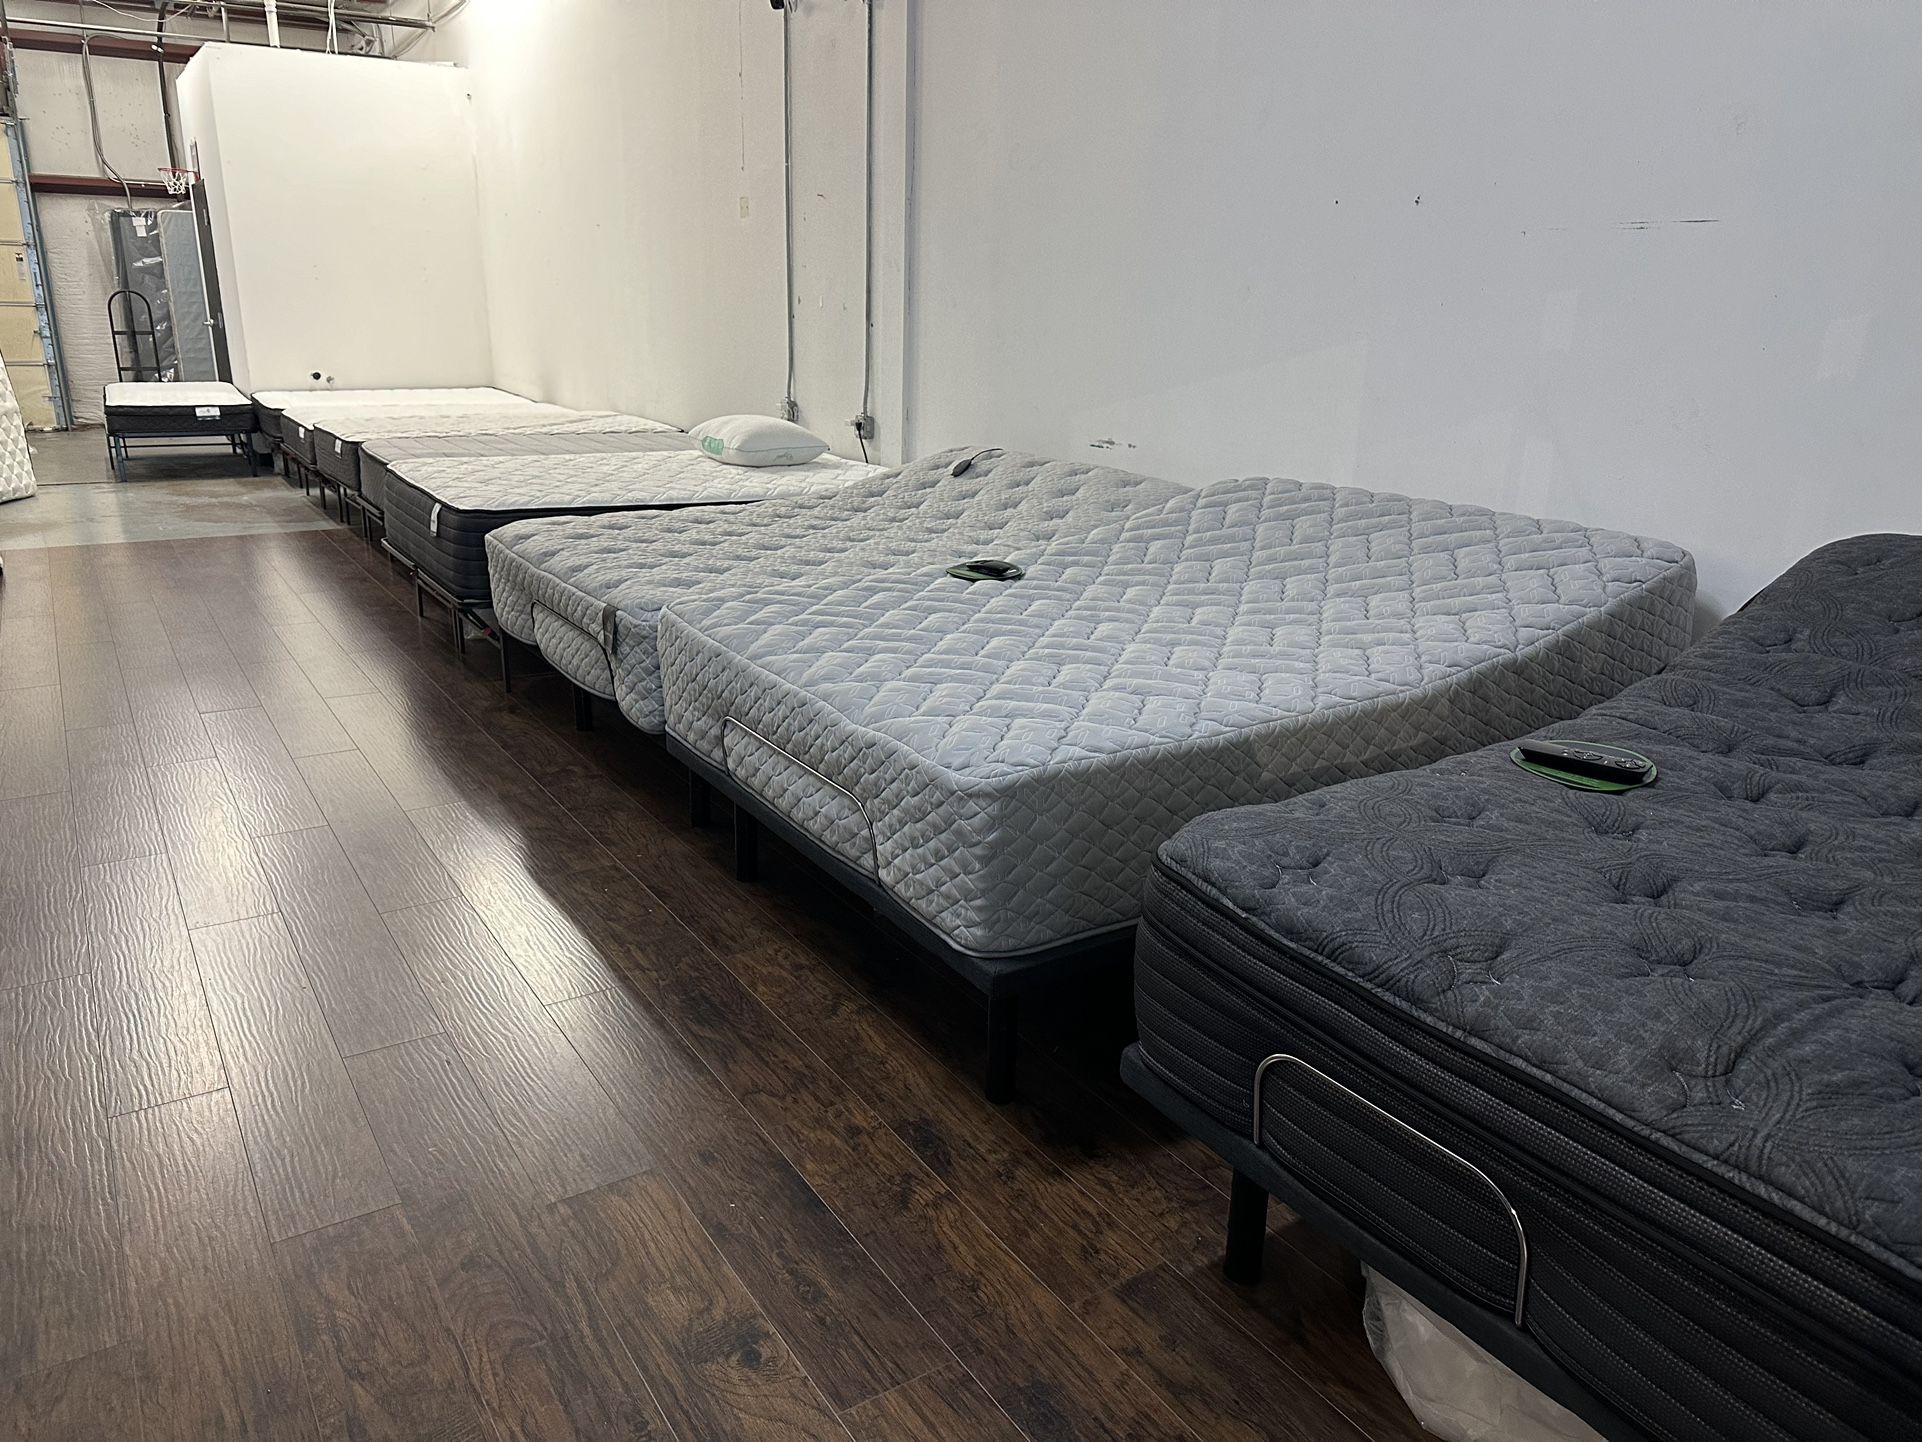 Get a Mattress Today for $20 Out The Door (more info in details)